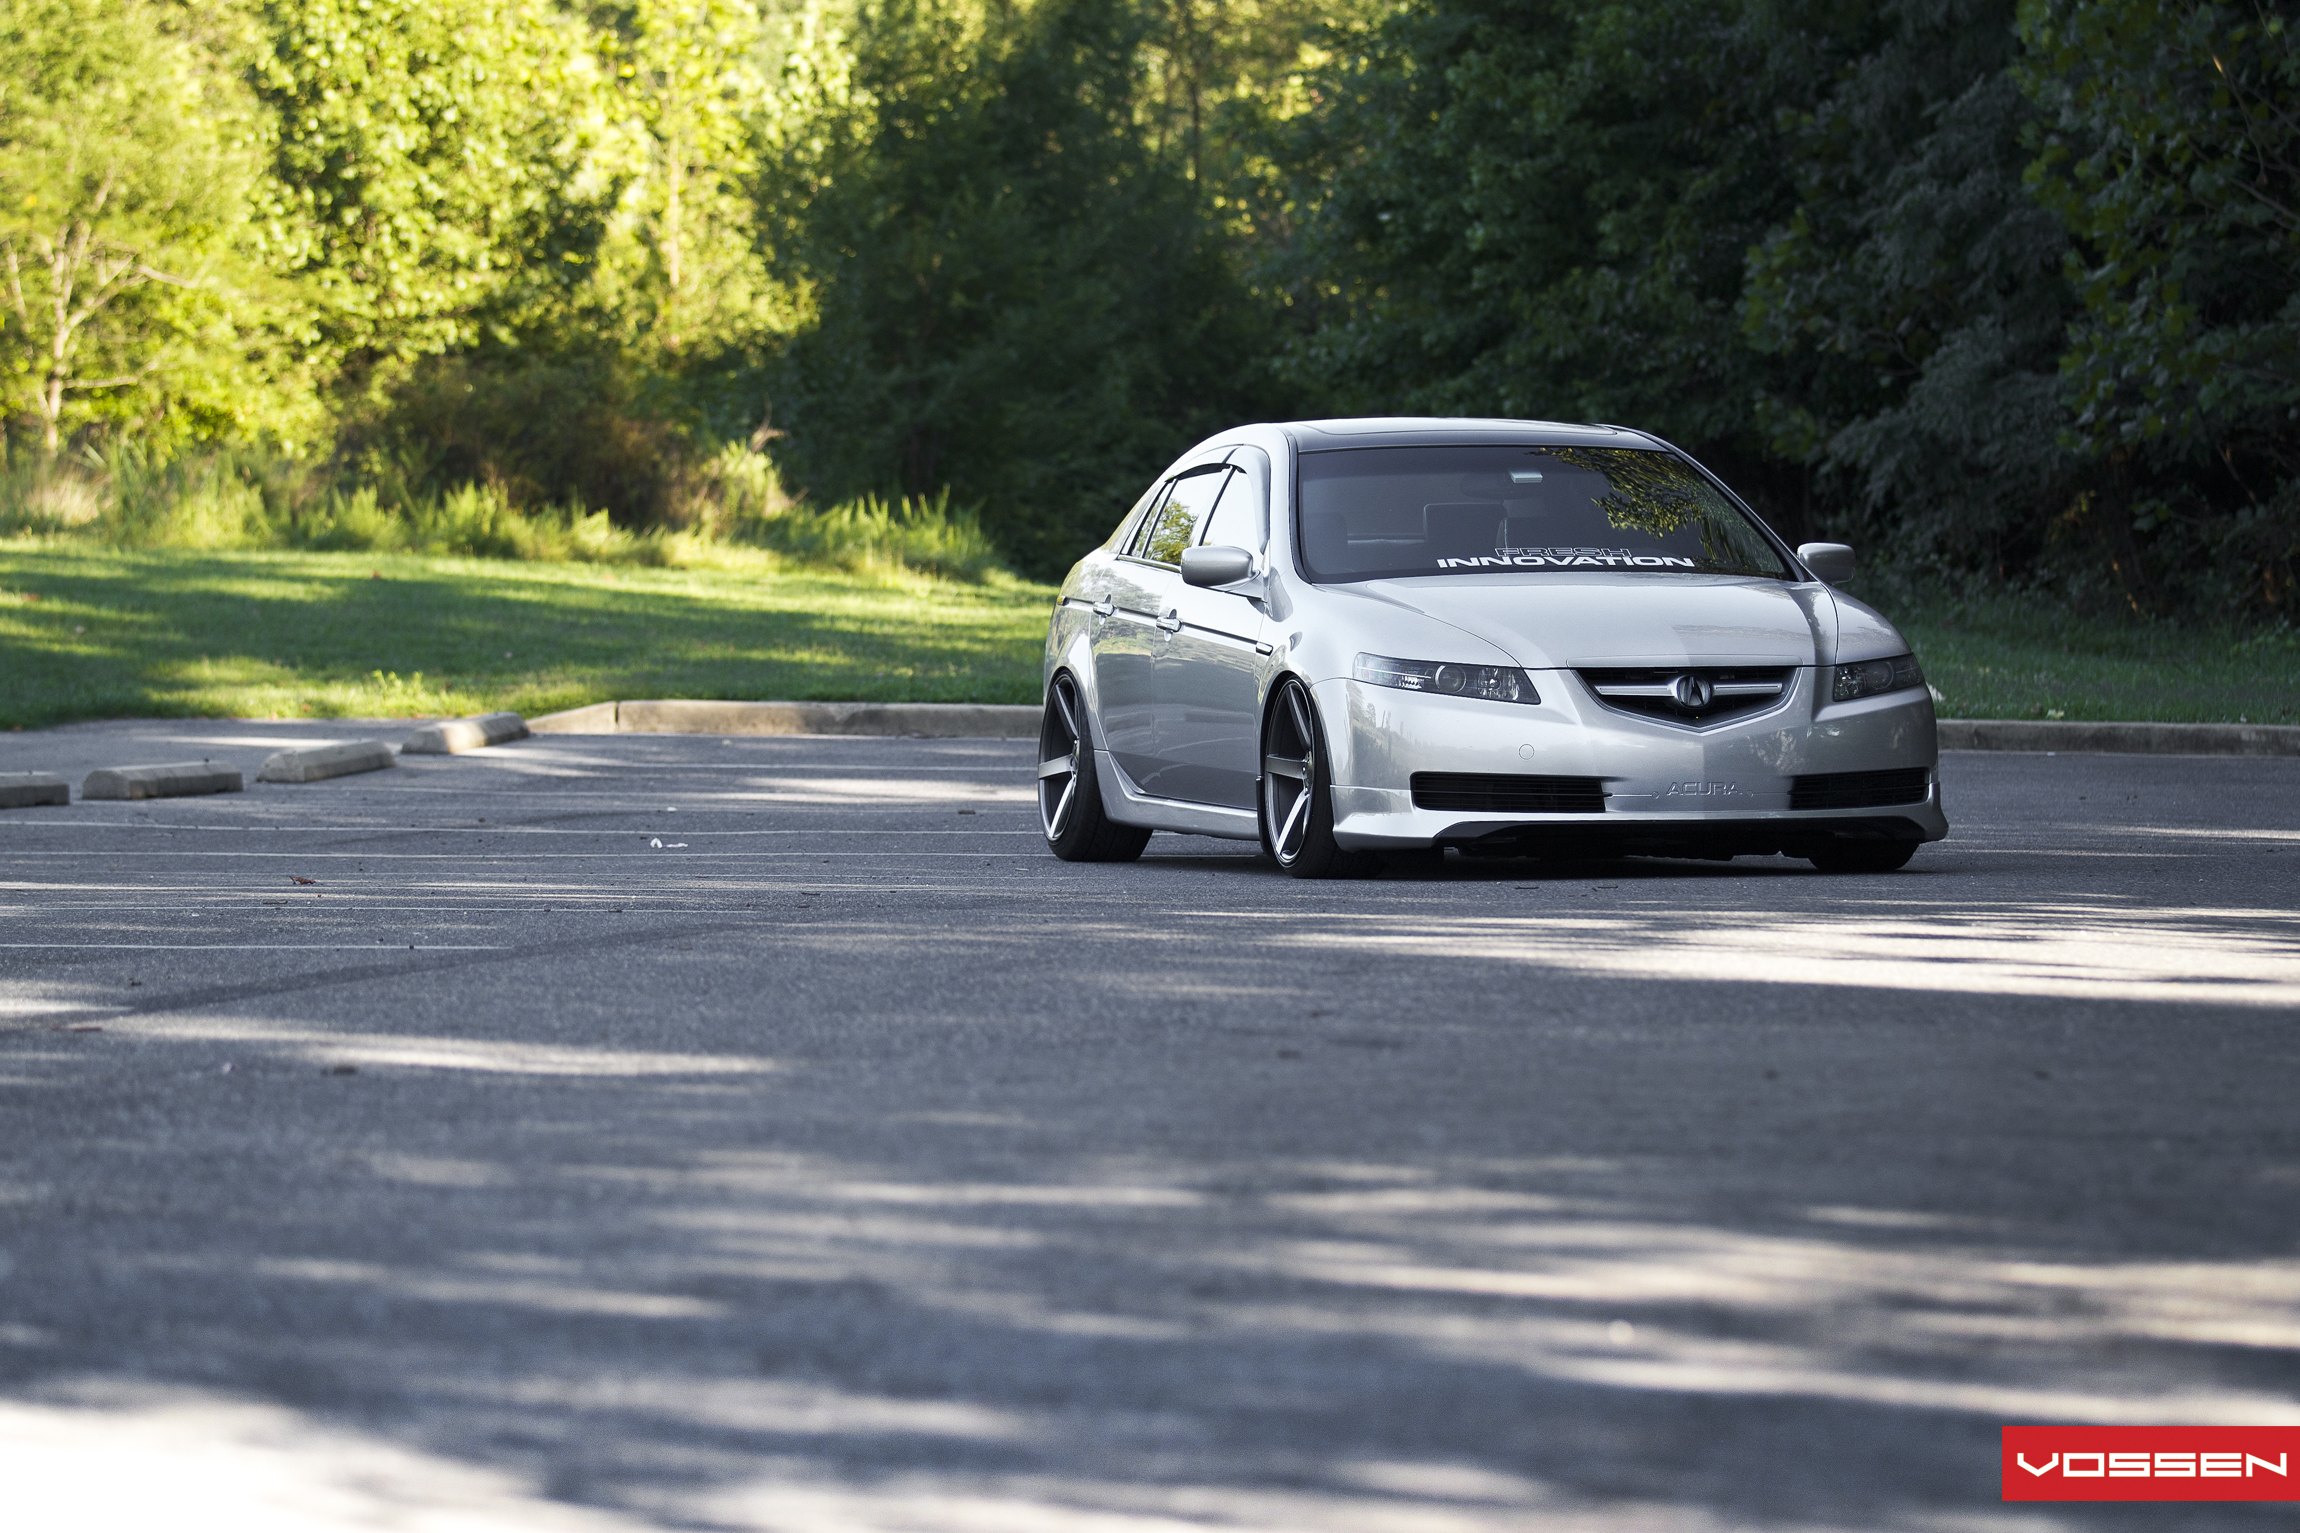 Silver Acura TL with Custom Front Bumper - Photo by Vossen